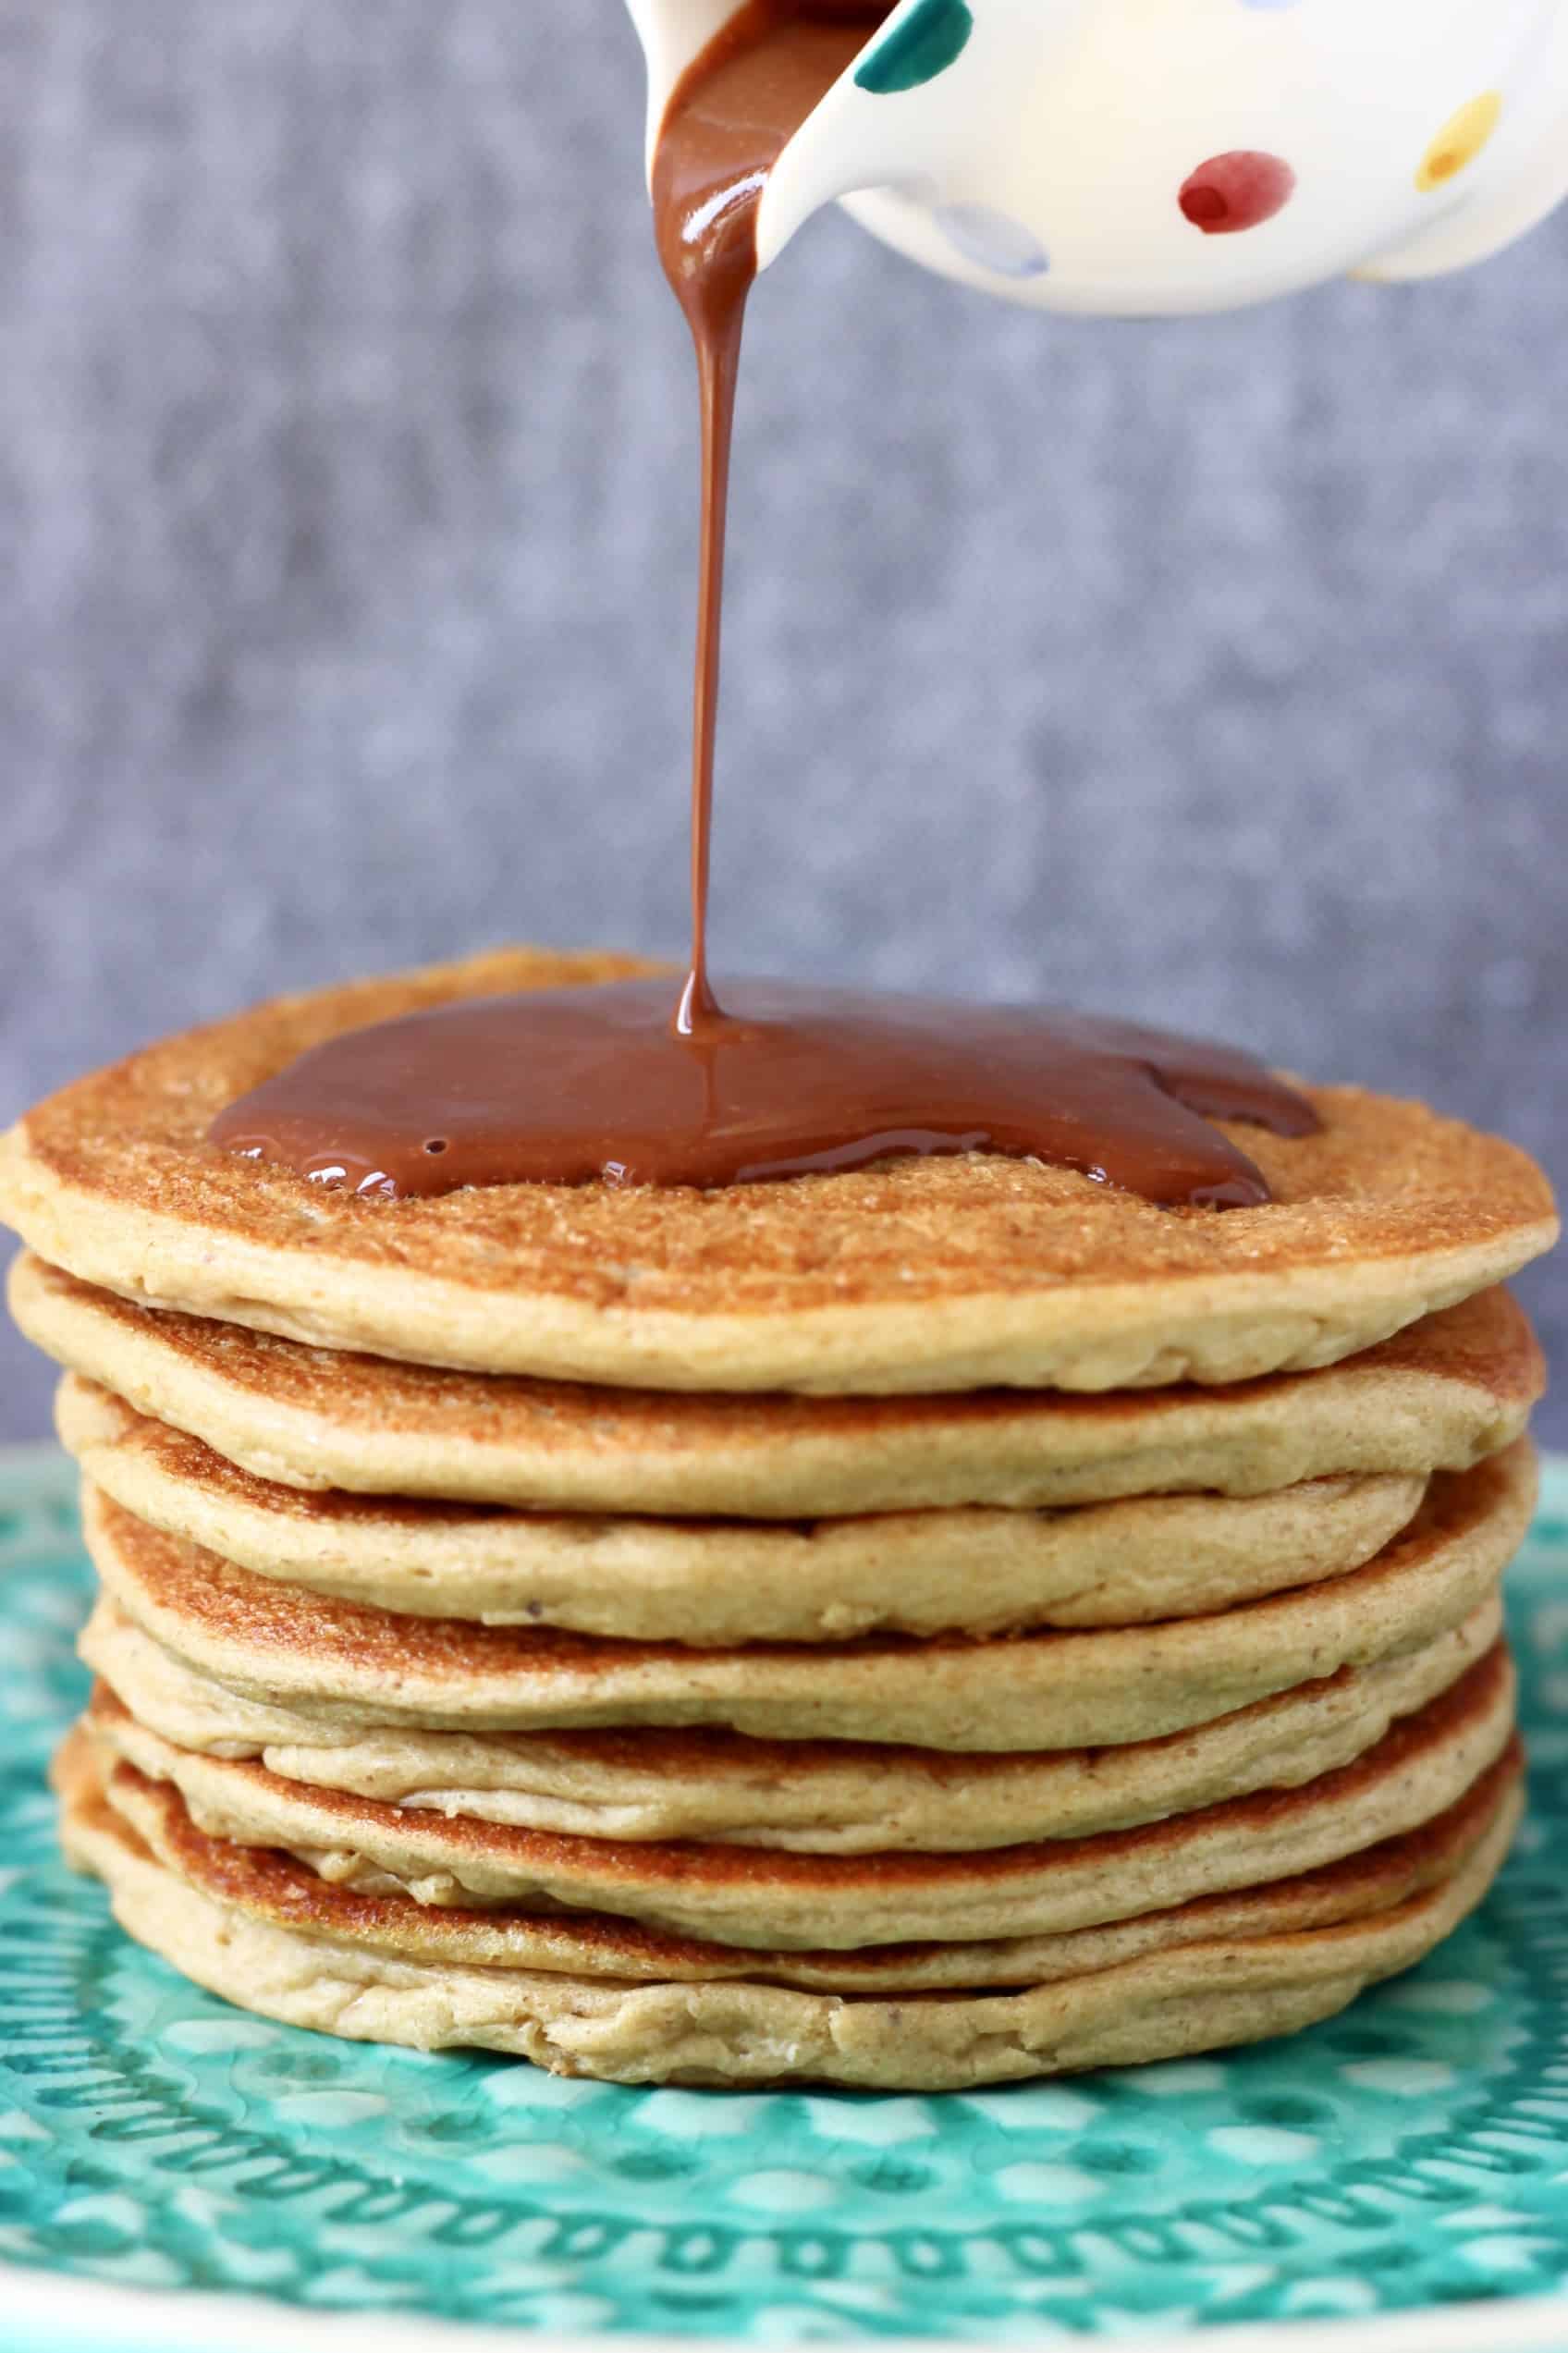 A stack of gluten-free vegan protein pancakes on a blue plate with chocolate sauce being poured on top